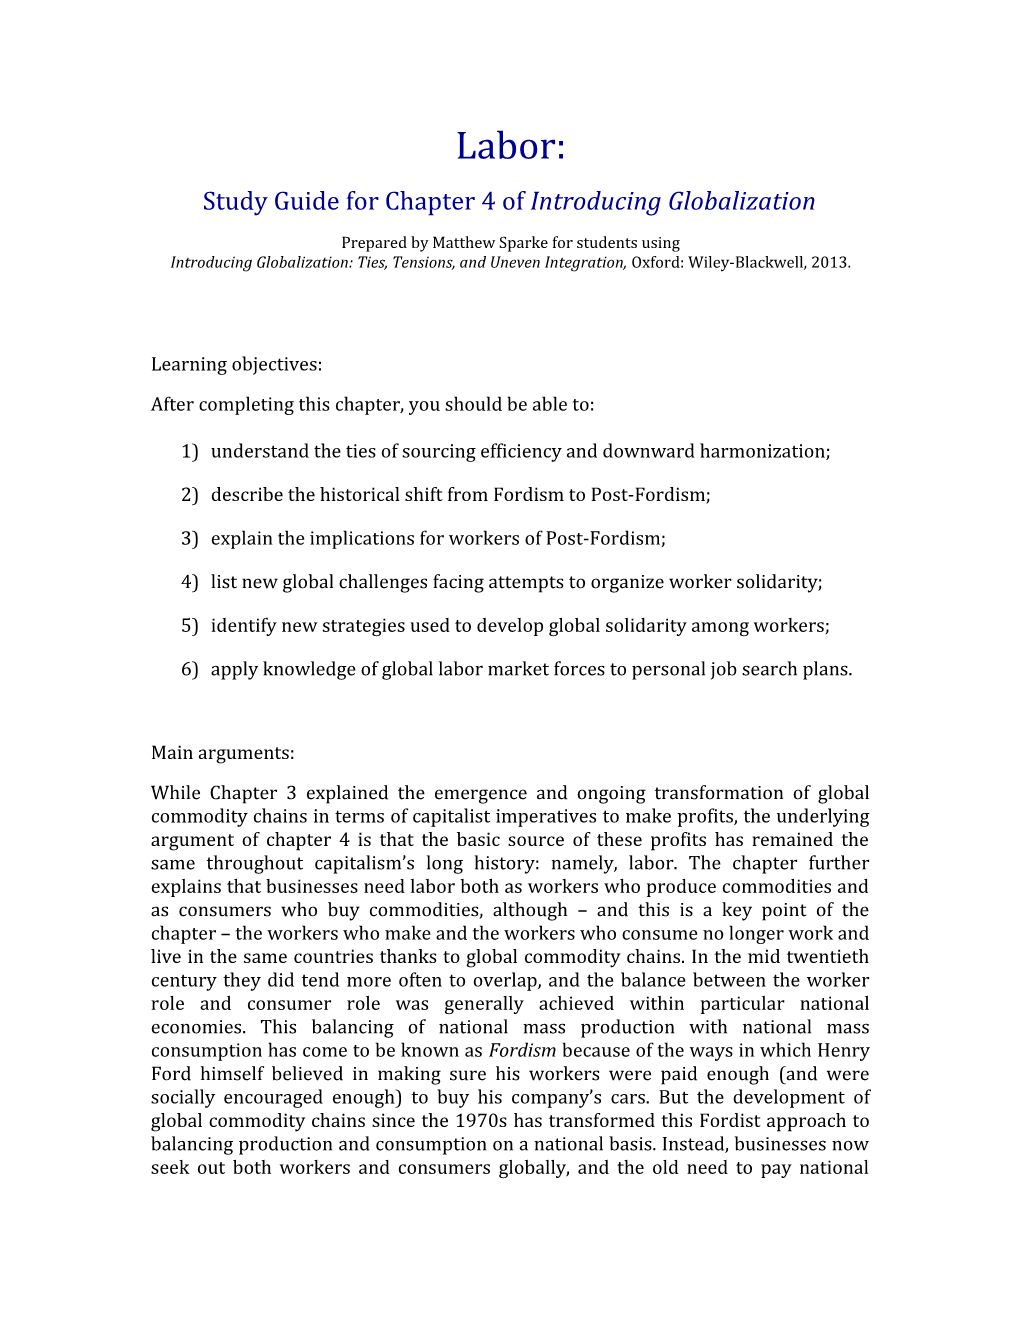 Study Guide for Chapter 4 of Introducingglobalization